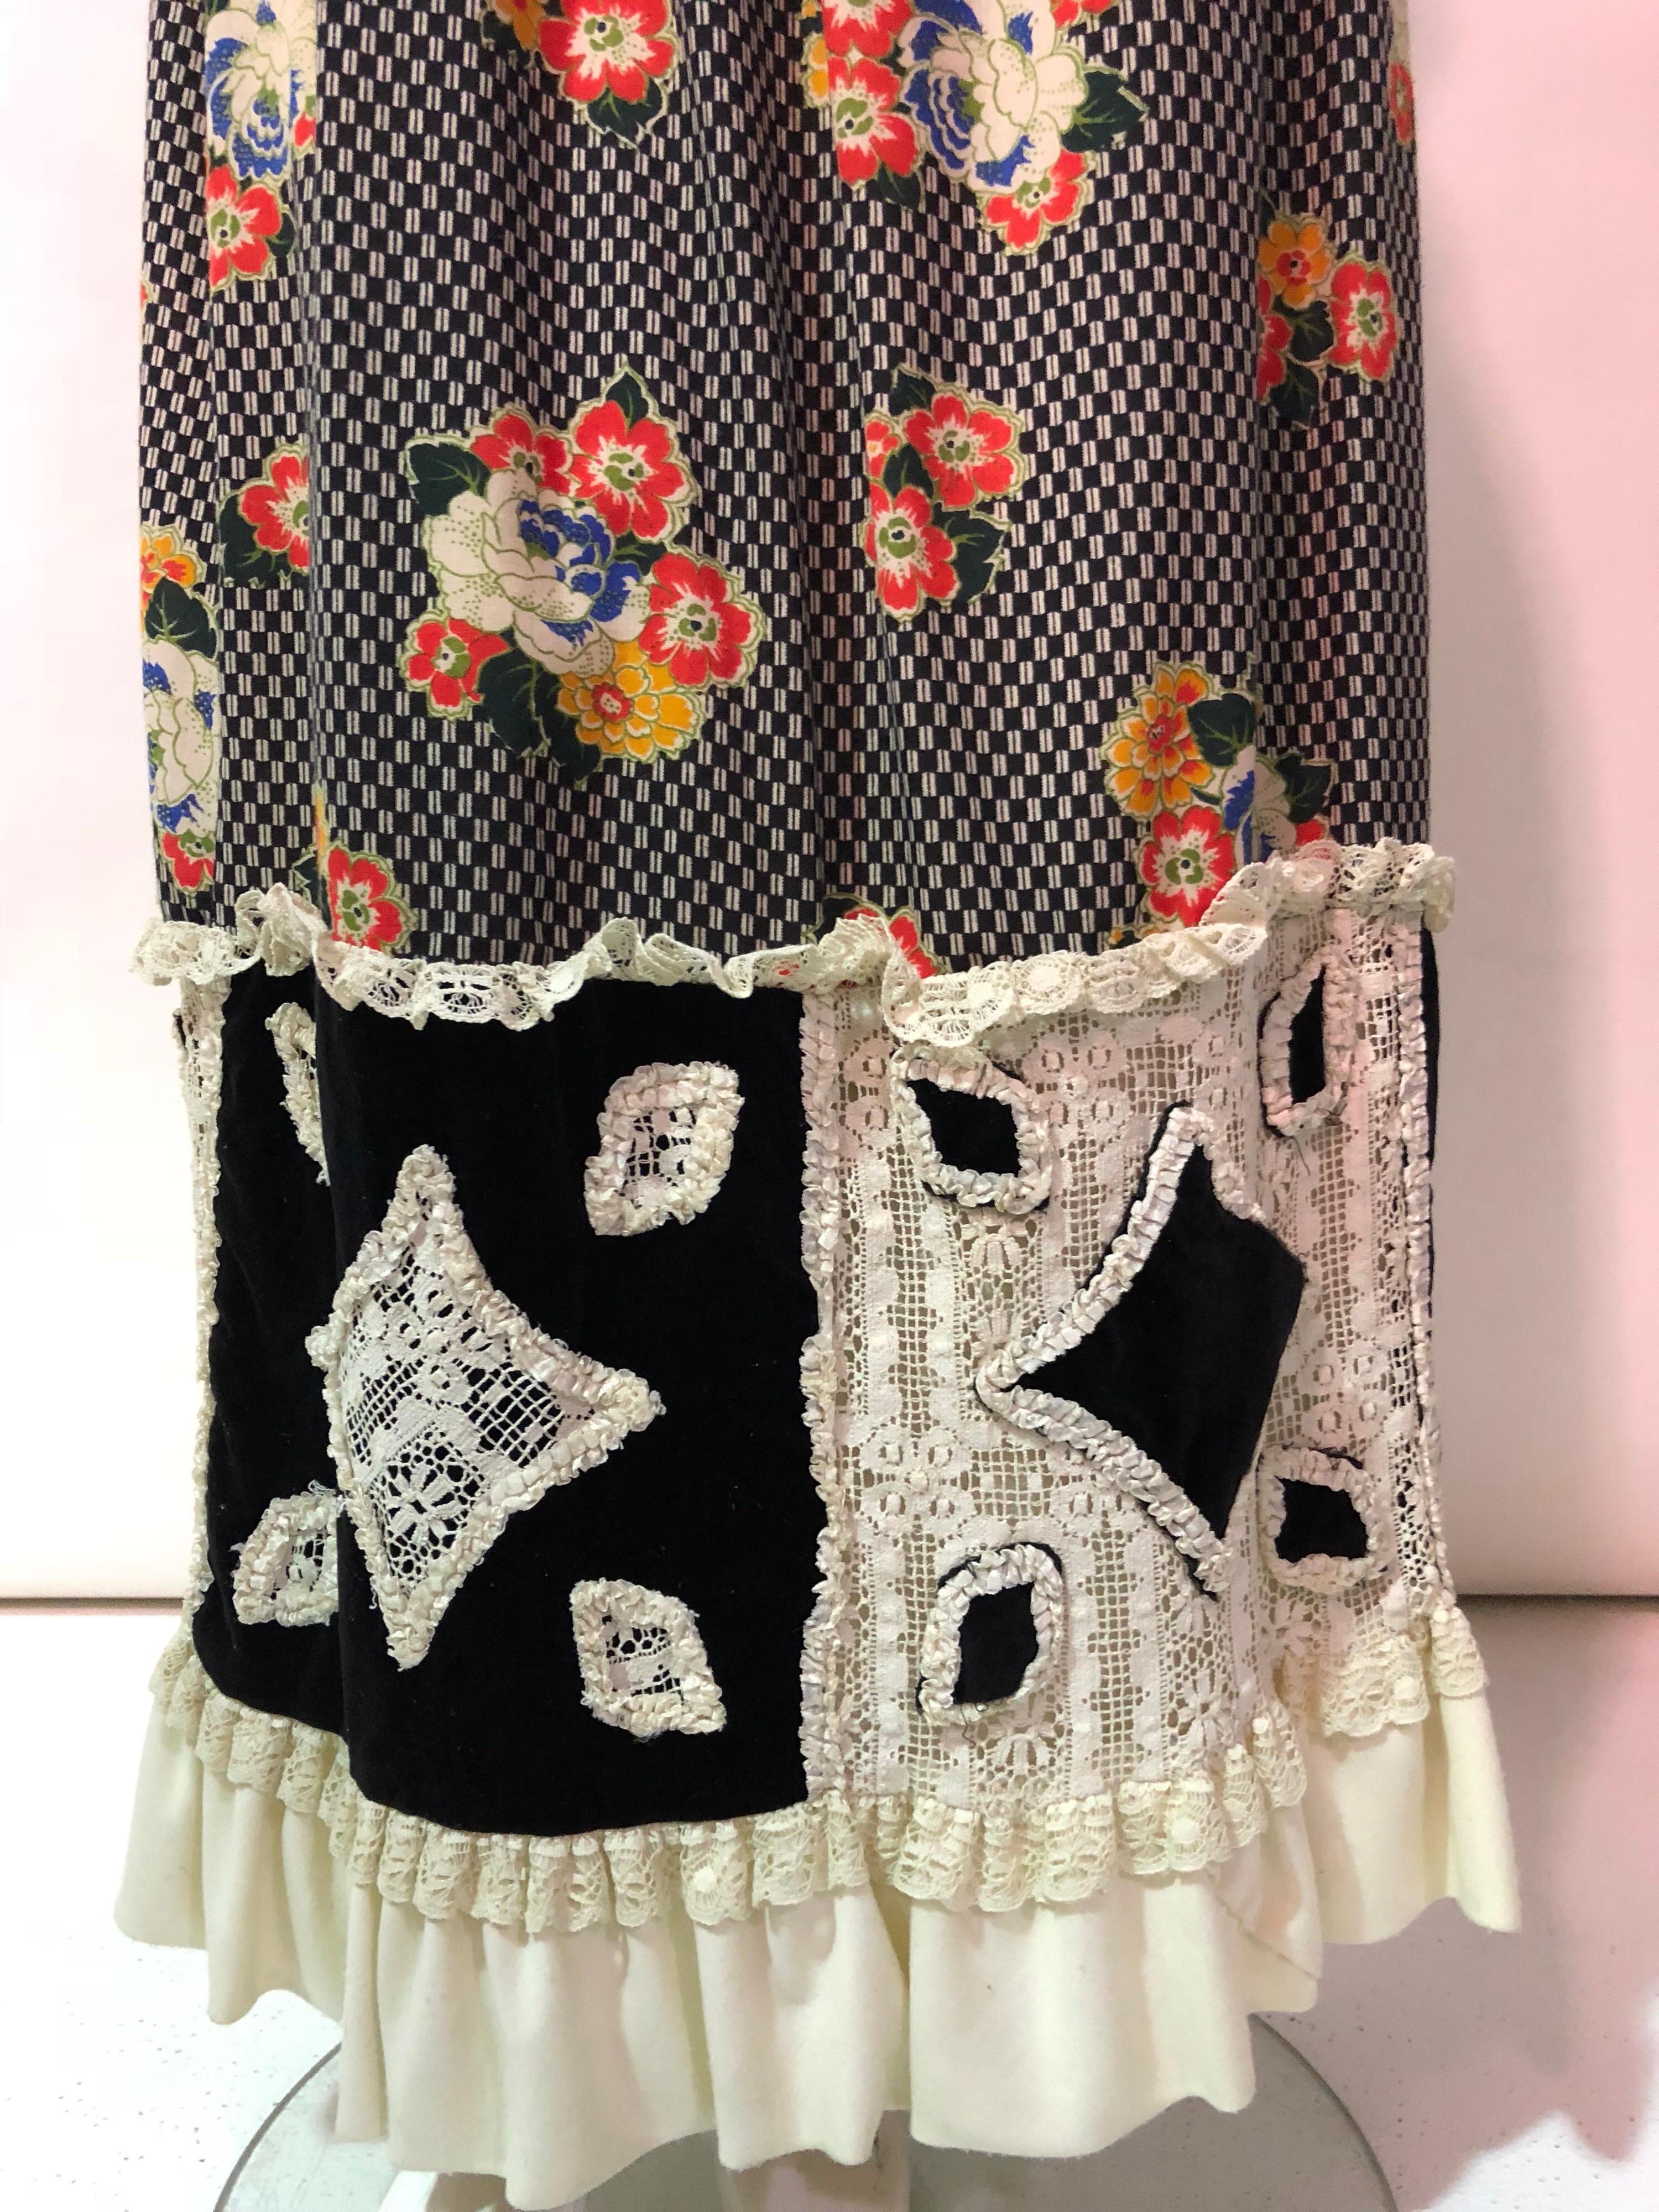 Chessa Davis was famous for her peasant skirts in Beverly Hills during the 70's. Her skirts were pieced together out of fabrics that were quilted from odds and ends. These comfortable and adjustable skirts were collector items for the rich and